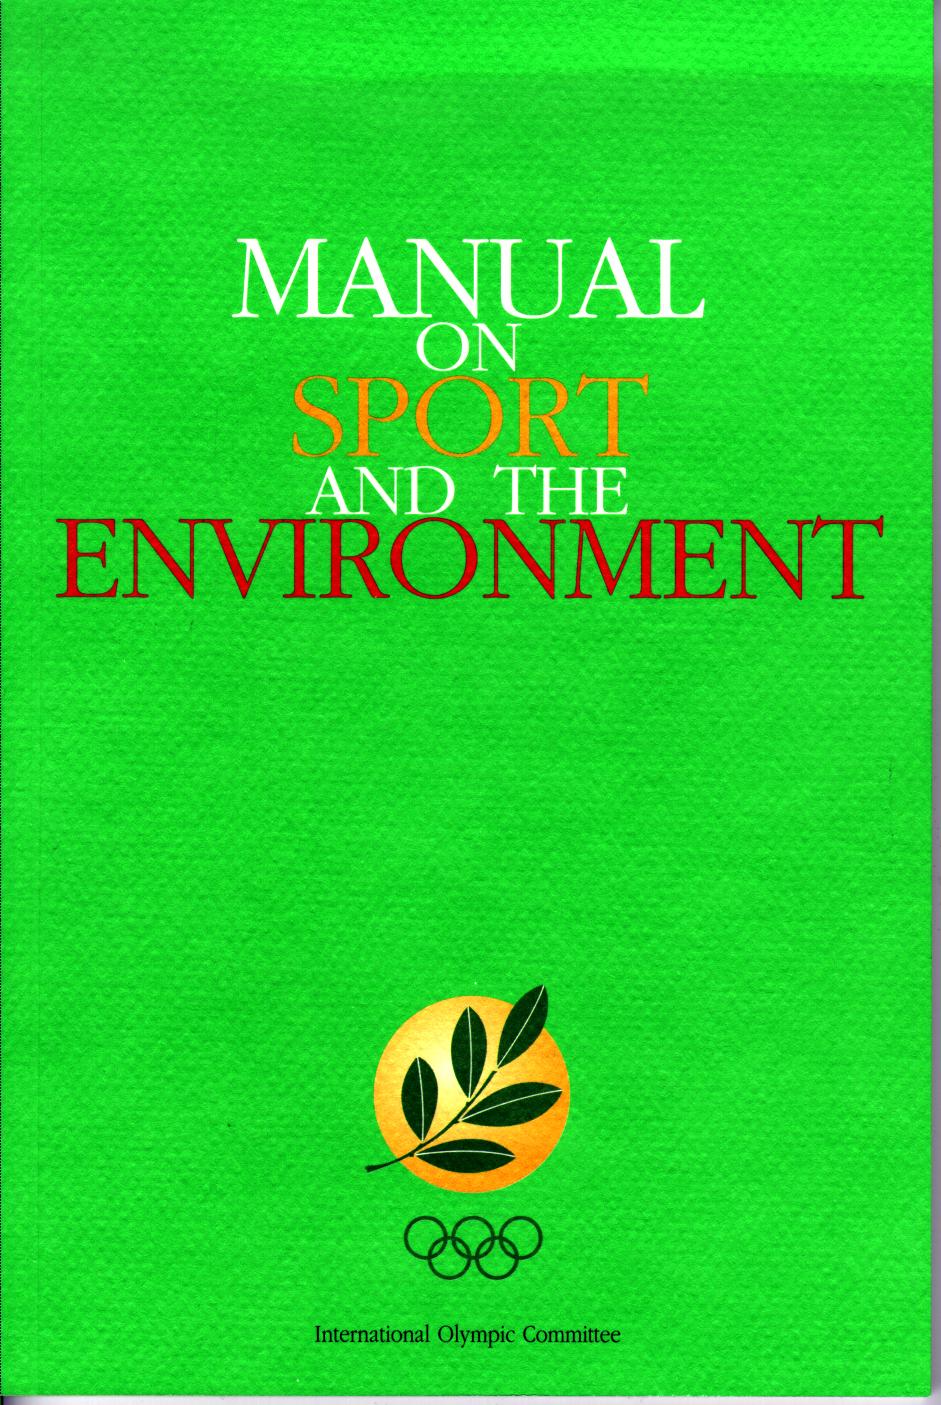 SPORT, ENVIRONMENT AND SUSTAINABLE DEVELOPMENT - PROGRESS REPORT Publications & Communication New edition of the Manual on Sport & Environment Published in 1997, the IOC Manual on Sport and